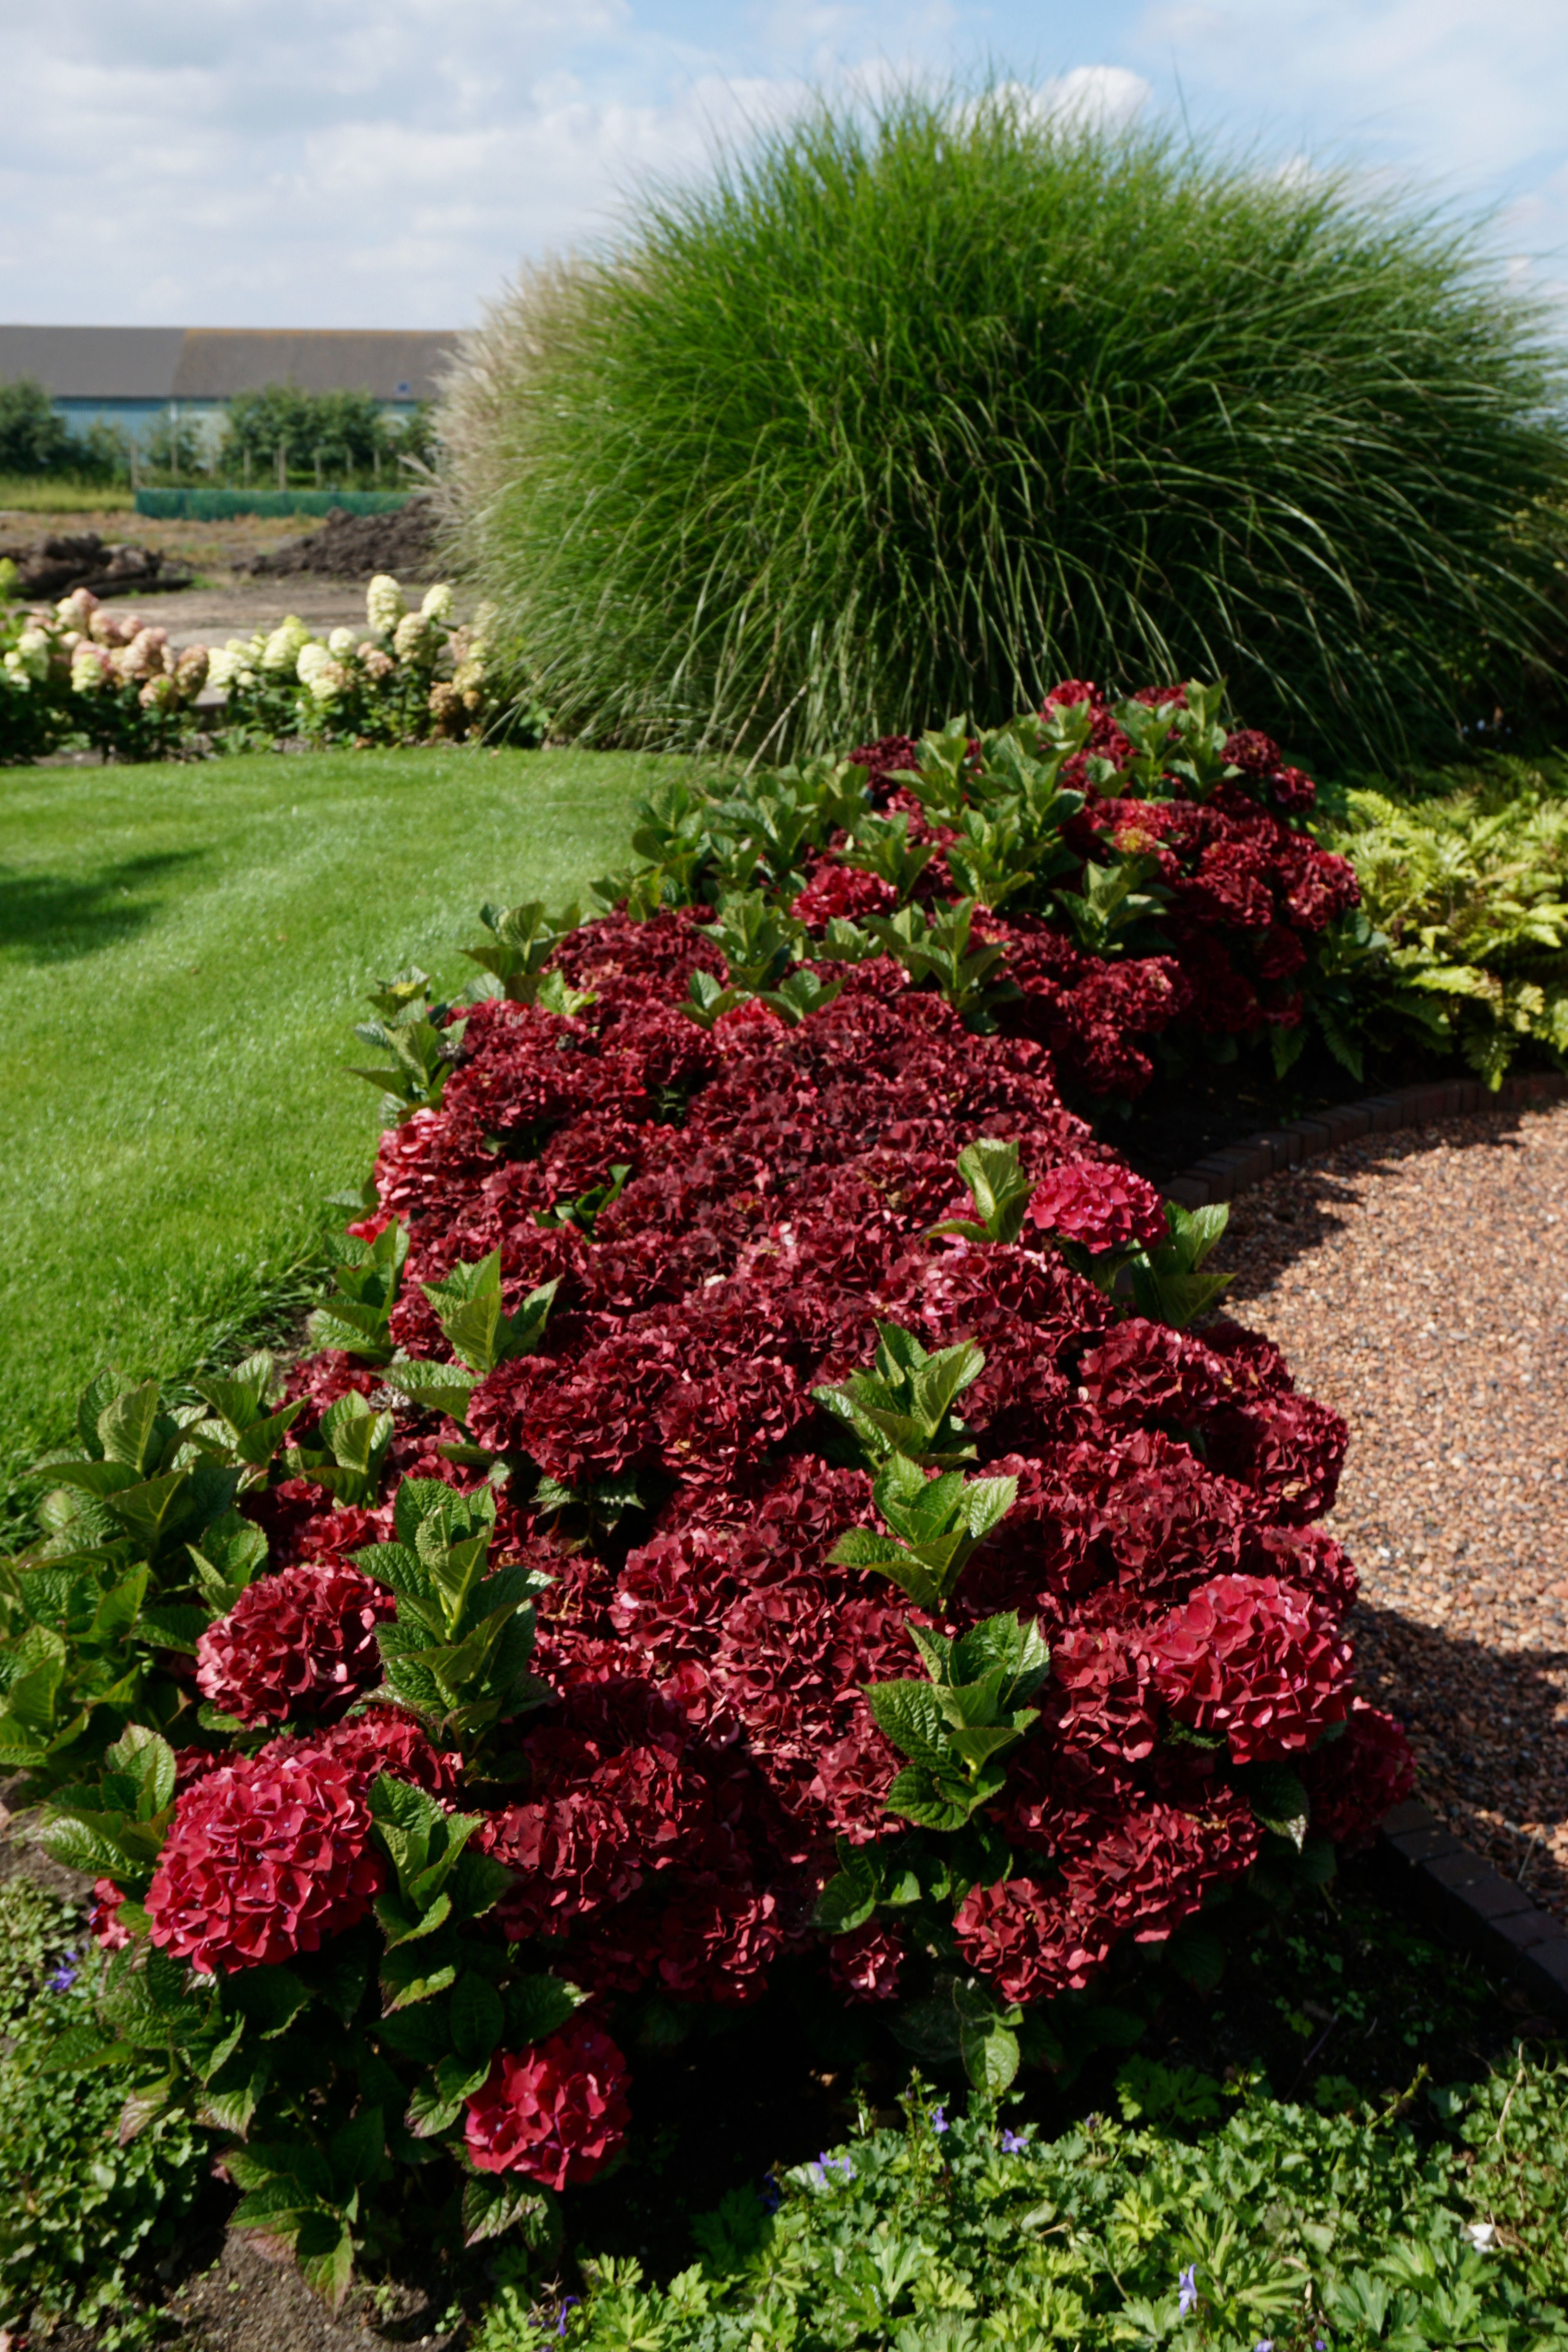 images/plants/hydrangea/hyd-magical-everlasting-crimson/hyd-magical-everlasting-crimson-0001.jpg